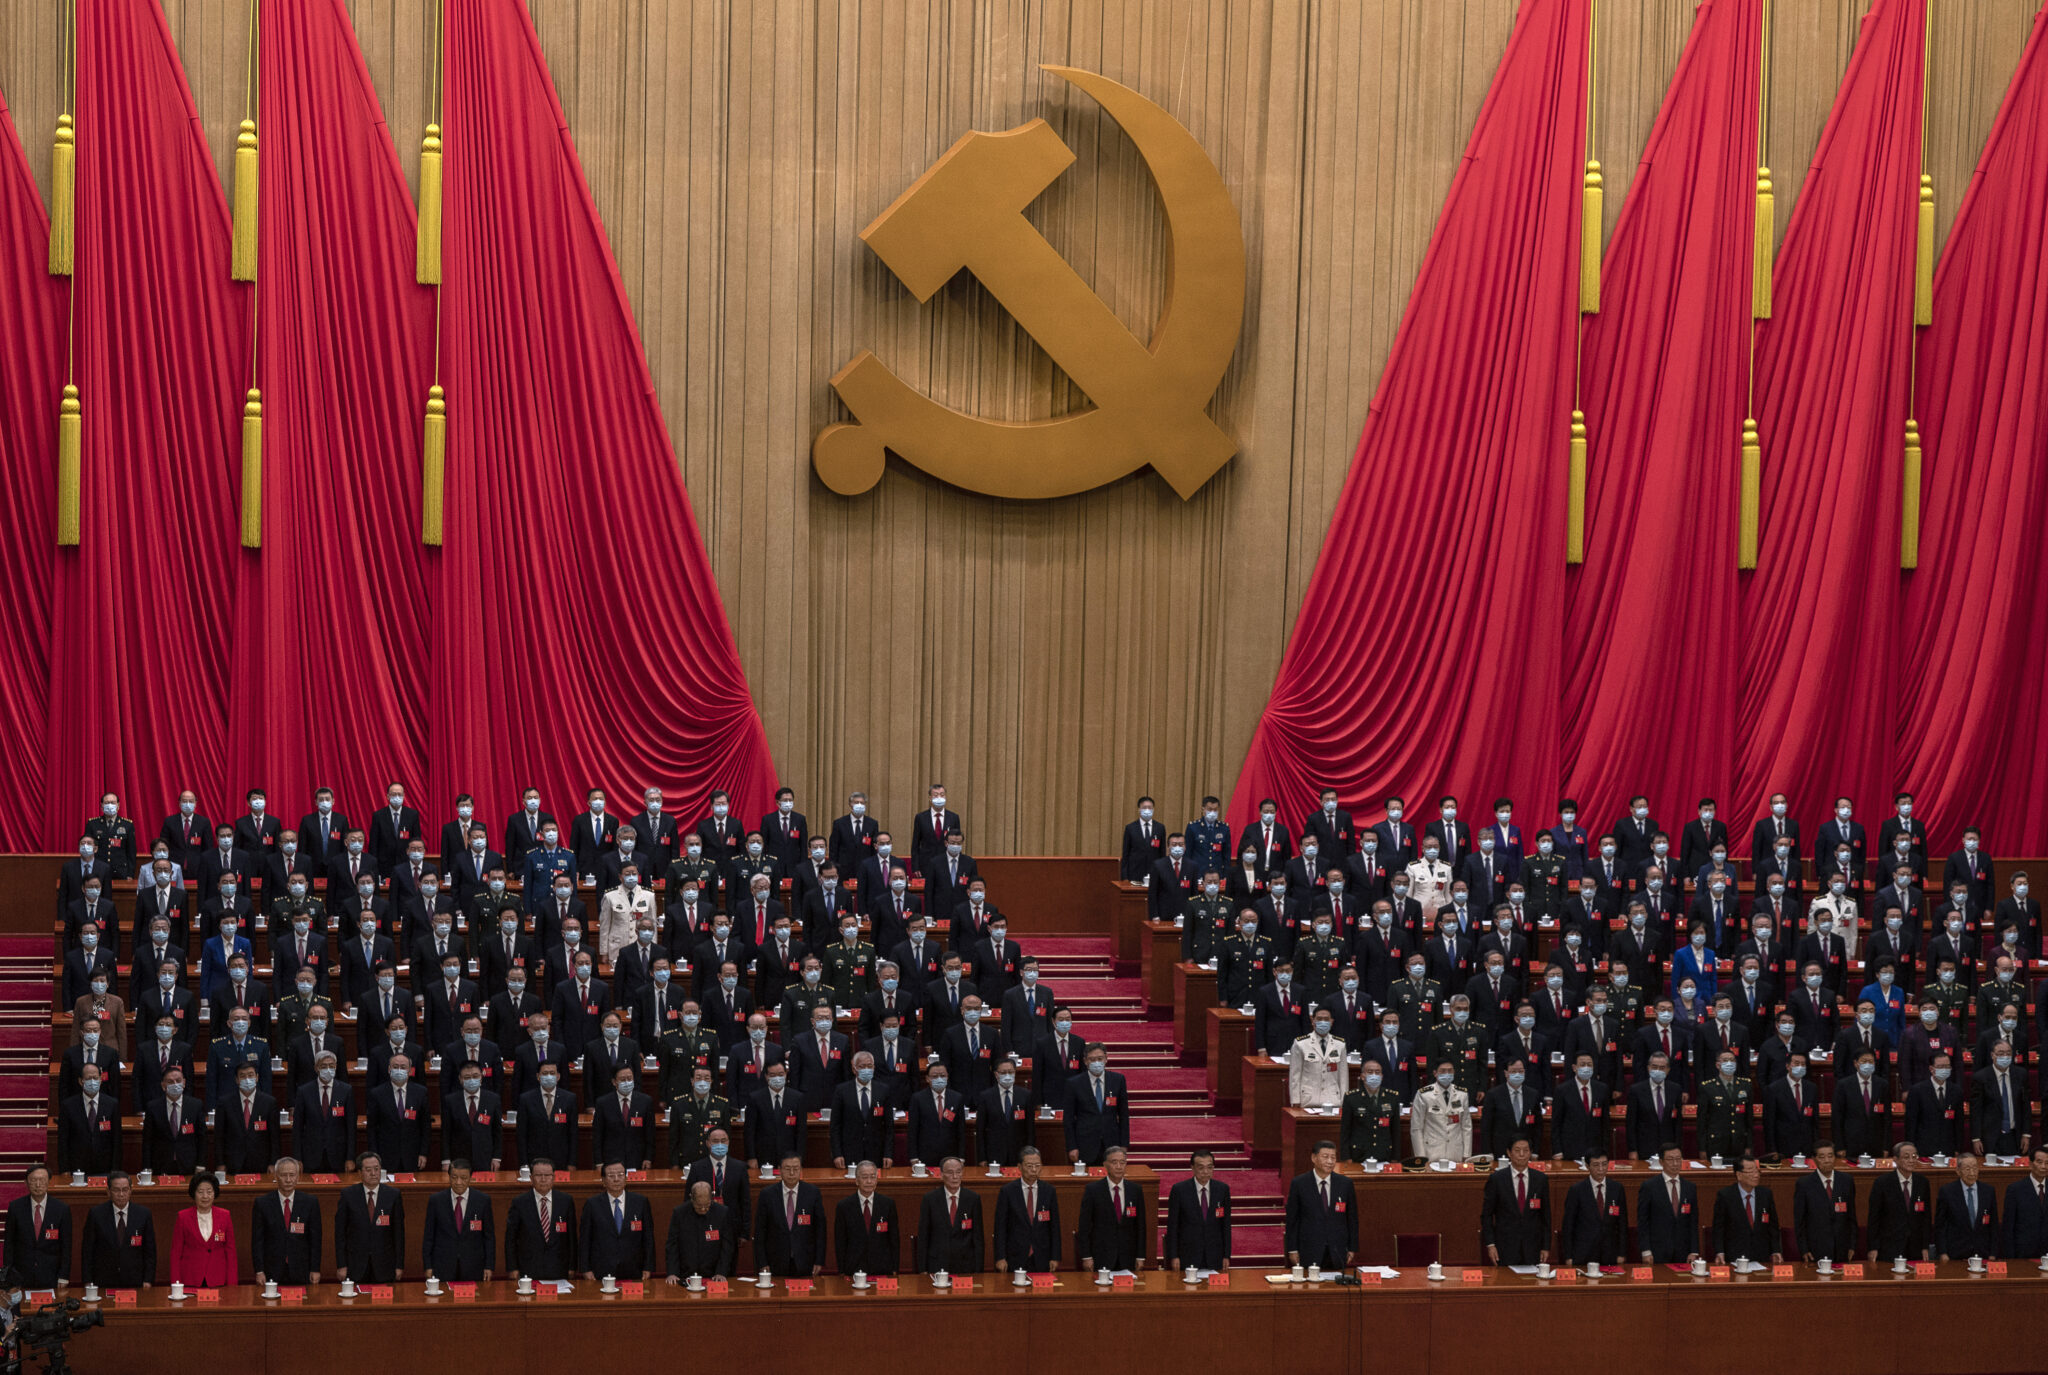 BEIJING, CHINA - OCTOBER 22: Chinese President Xi Jinping, bottom centre, and senior members of the government stand for the national anthem at the end of the closing session of the 20th National Congress of the Communist Party of China, at The Great Hall of People on October 22, 2022 in Beijing, China. China's Communist Party Congress is concluding today with incumbent President Xi Jinping expected to seal a third term in power. (Photo by Kevin Frayer/Getty Images)